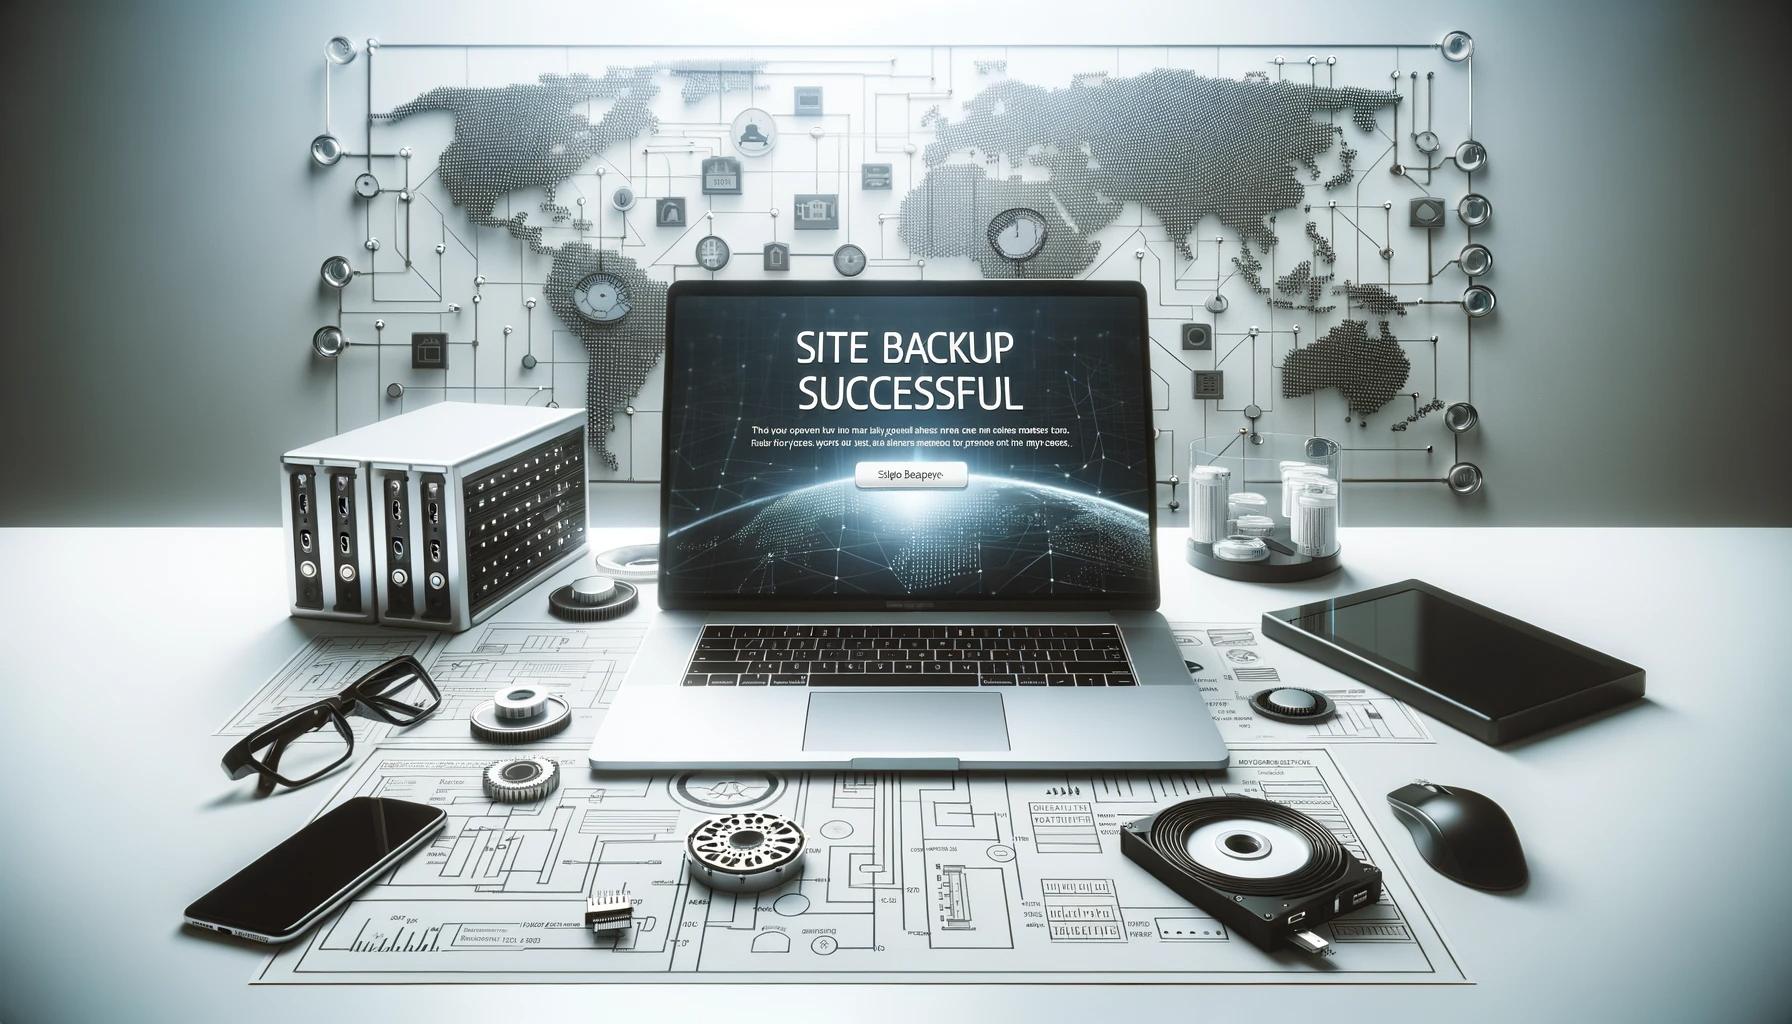 Workspace with computer displaying 'Site Restoration Complete' message, emphasizing the importance of website backup and disaster recovery planning.